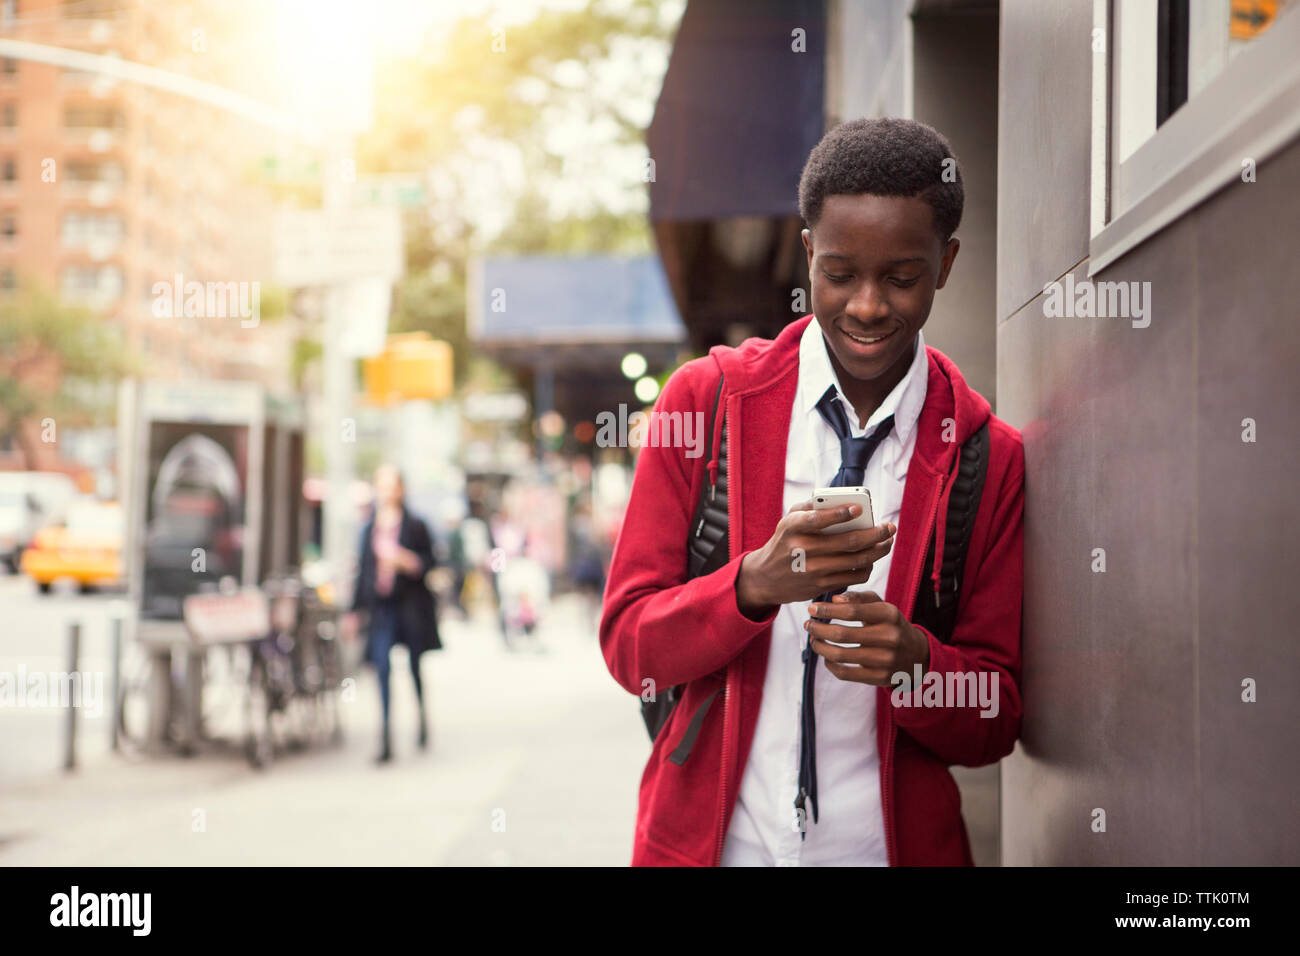 Smiling student using phone while leaning on wall in city Stock Photo